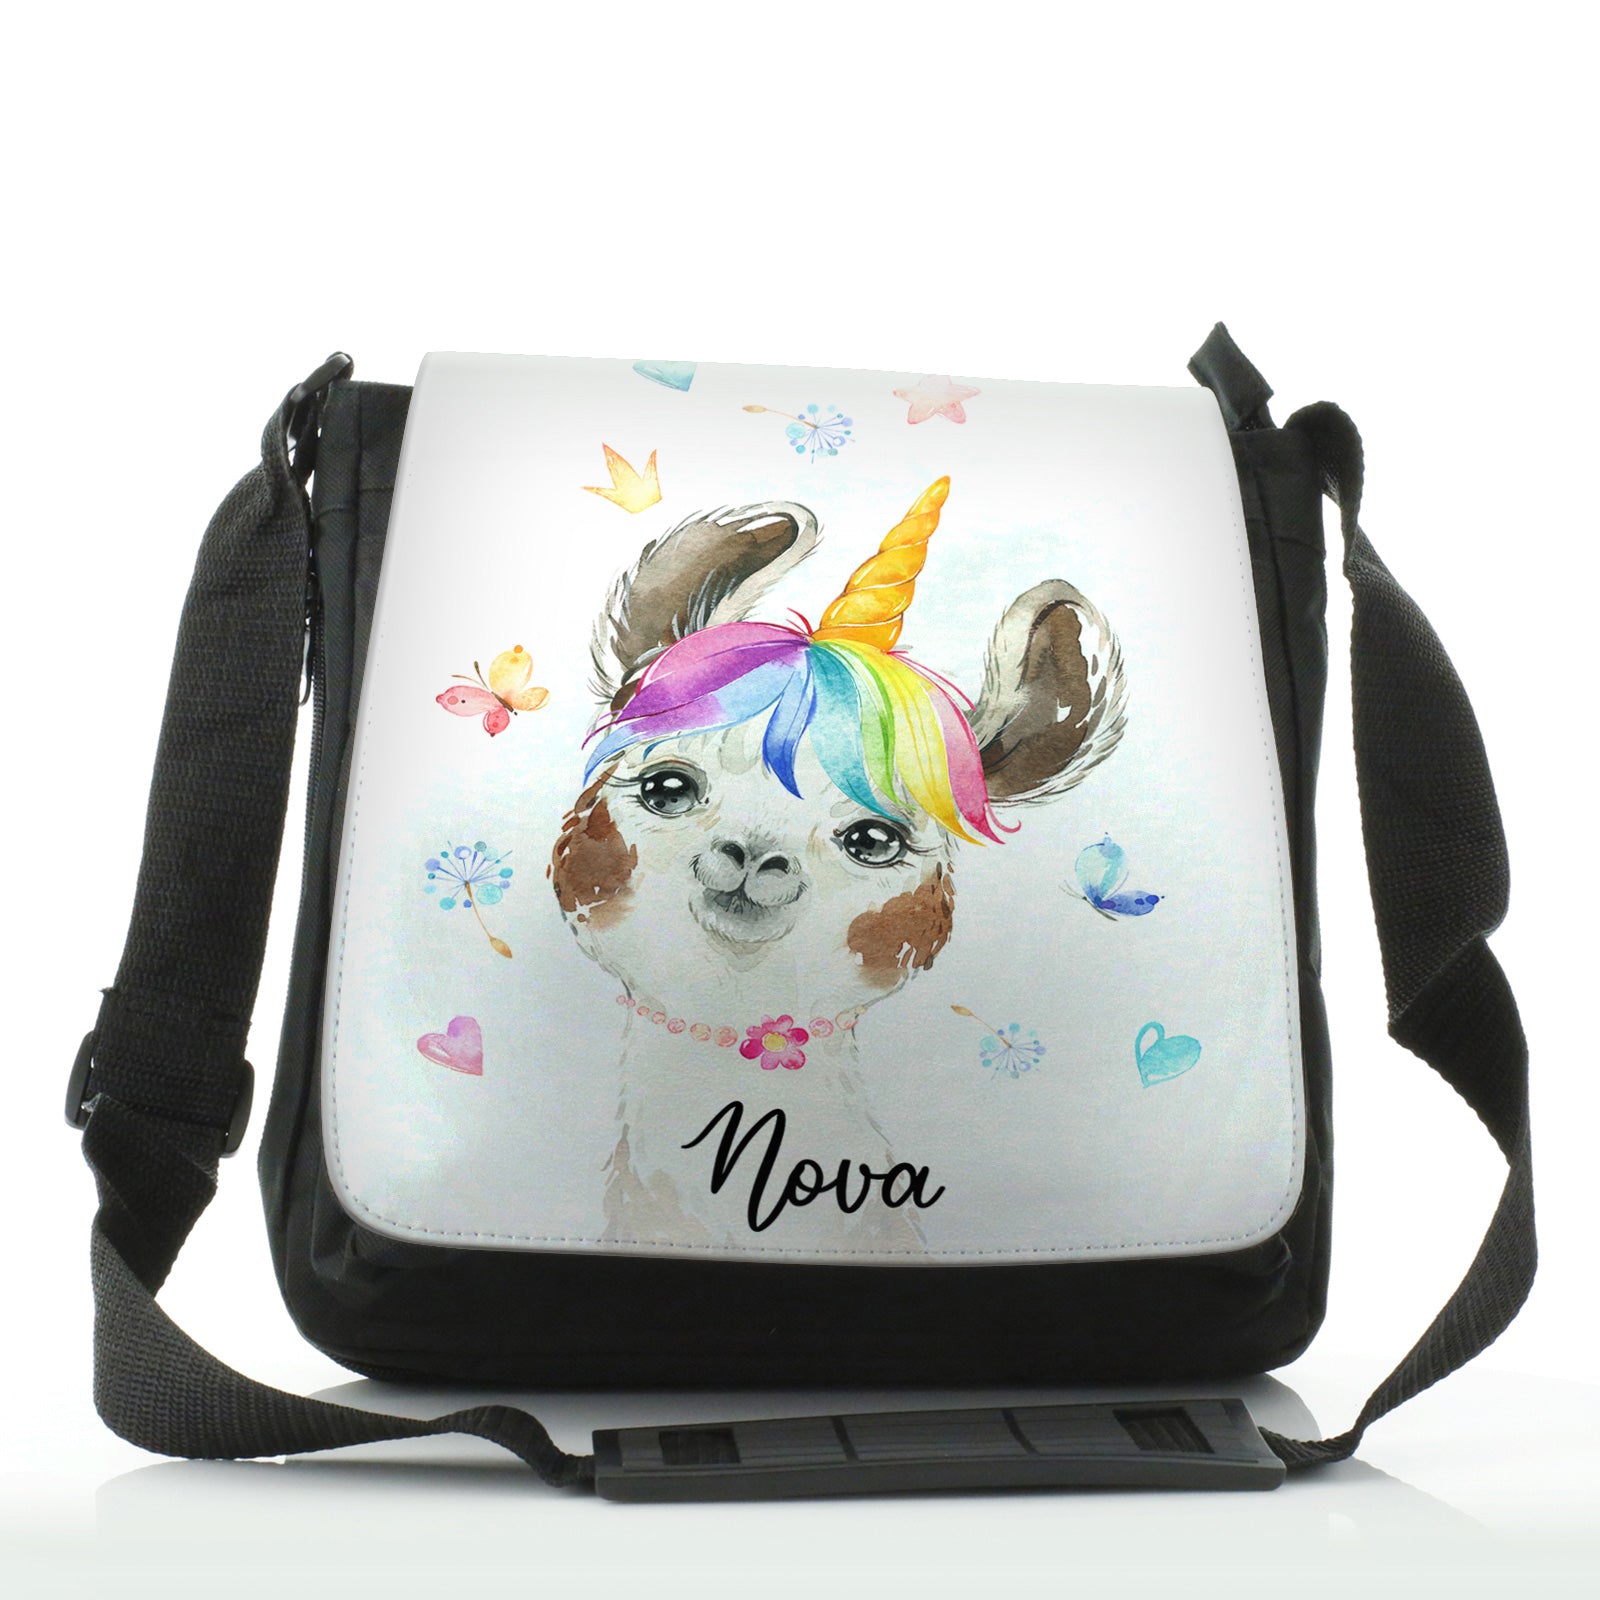 Personalised Shoulder Bag with Alpaca Unicorn with Rainbow Hair Hearts Stars and Cute Text